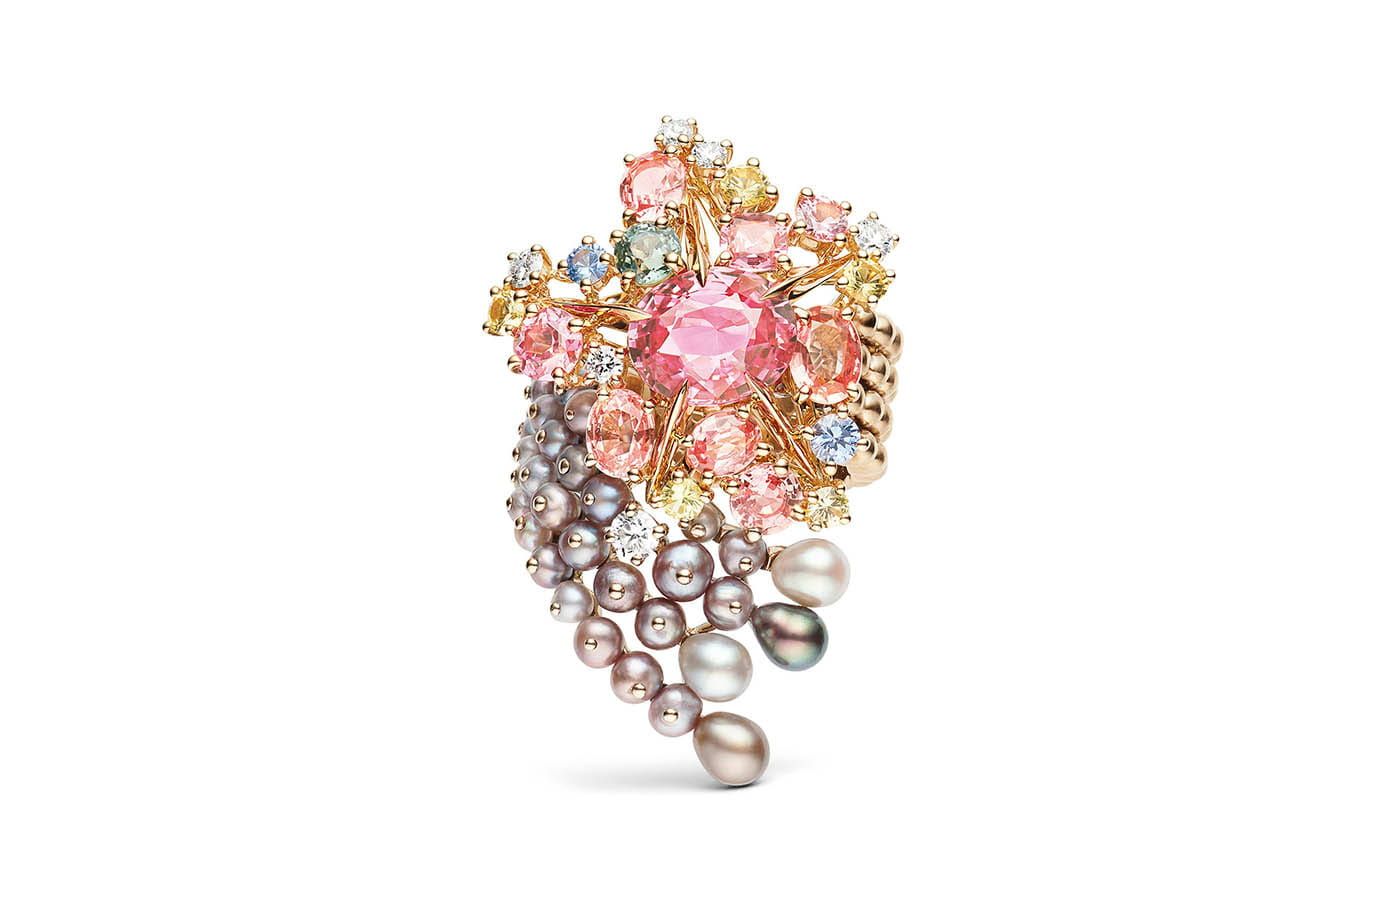 Chaumet Comets From The Sea ring in white gold, yellow gold, Padparadscha sapphire and diamond from the Ondes et Merveilles High Jewellery collection